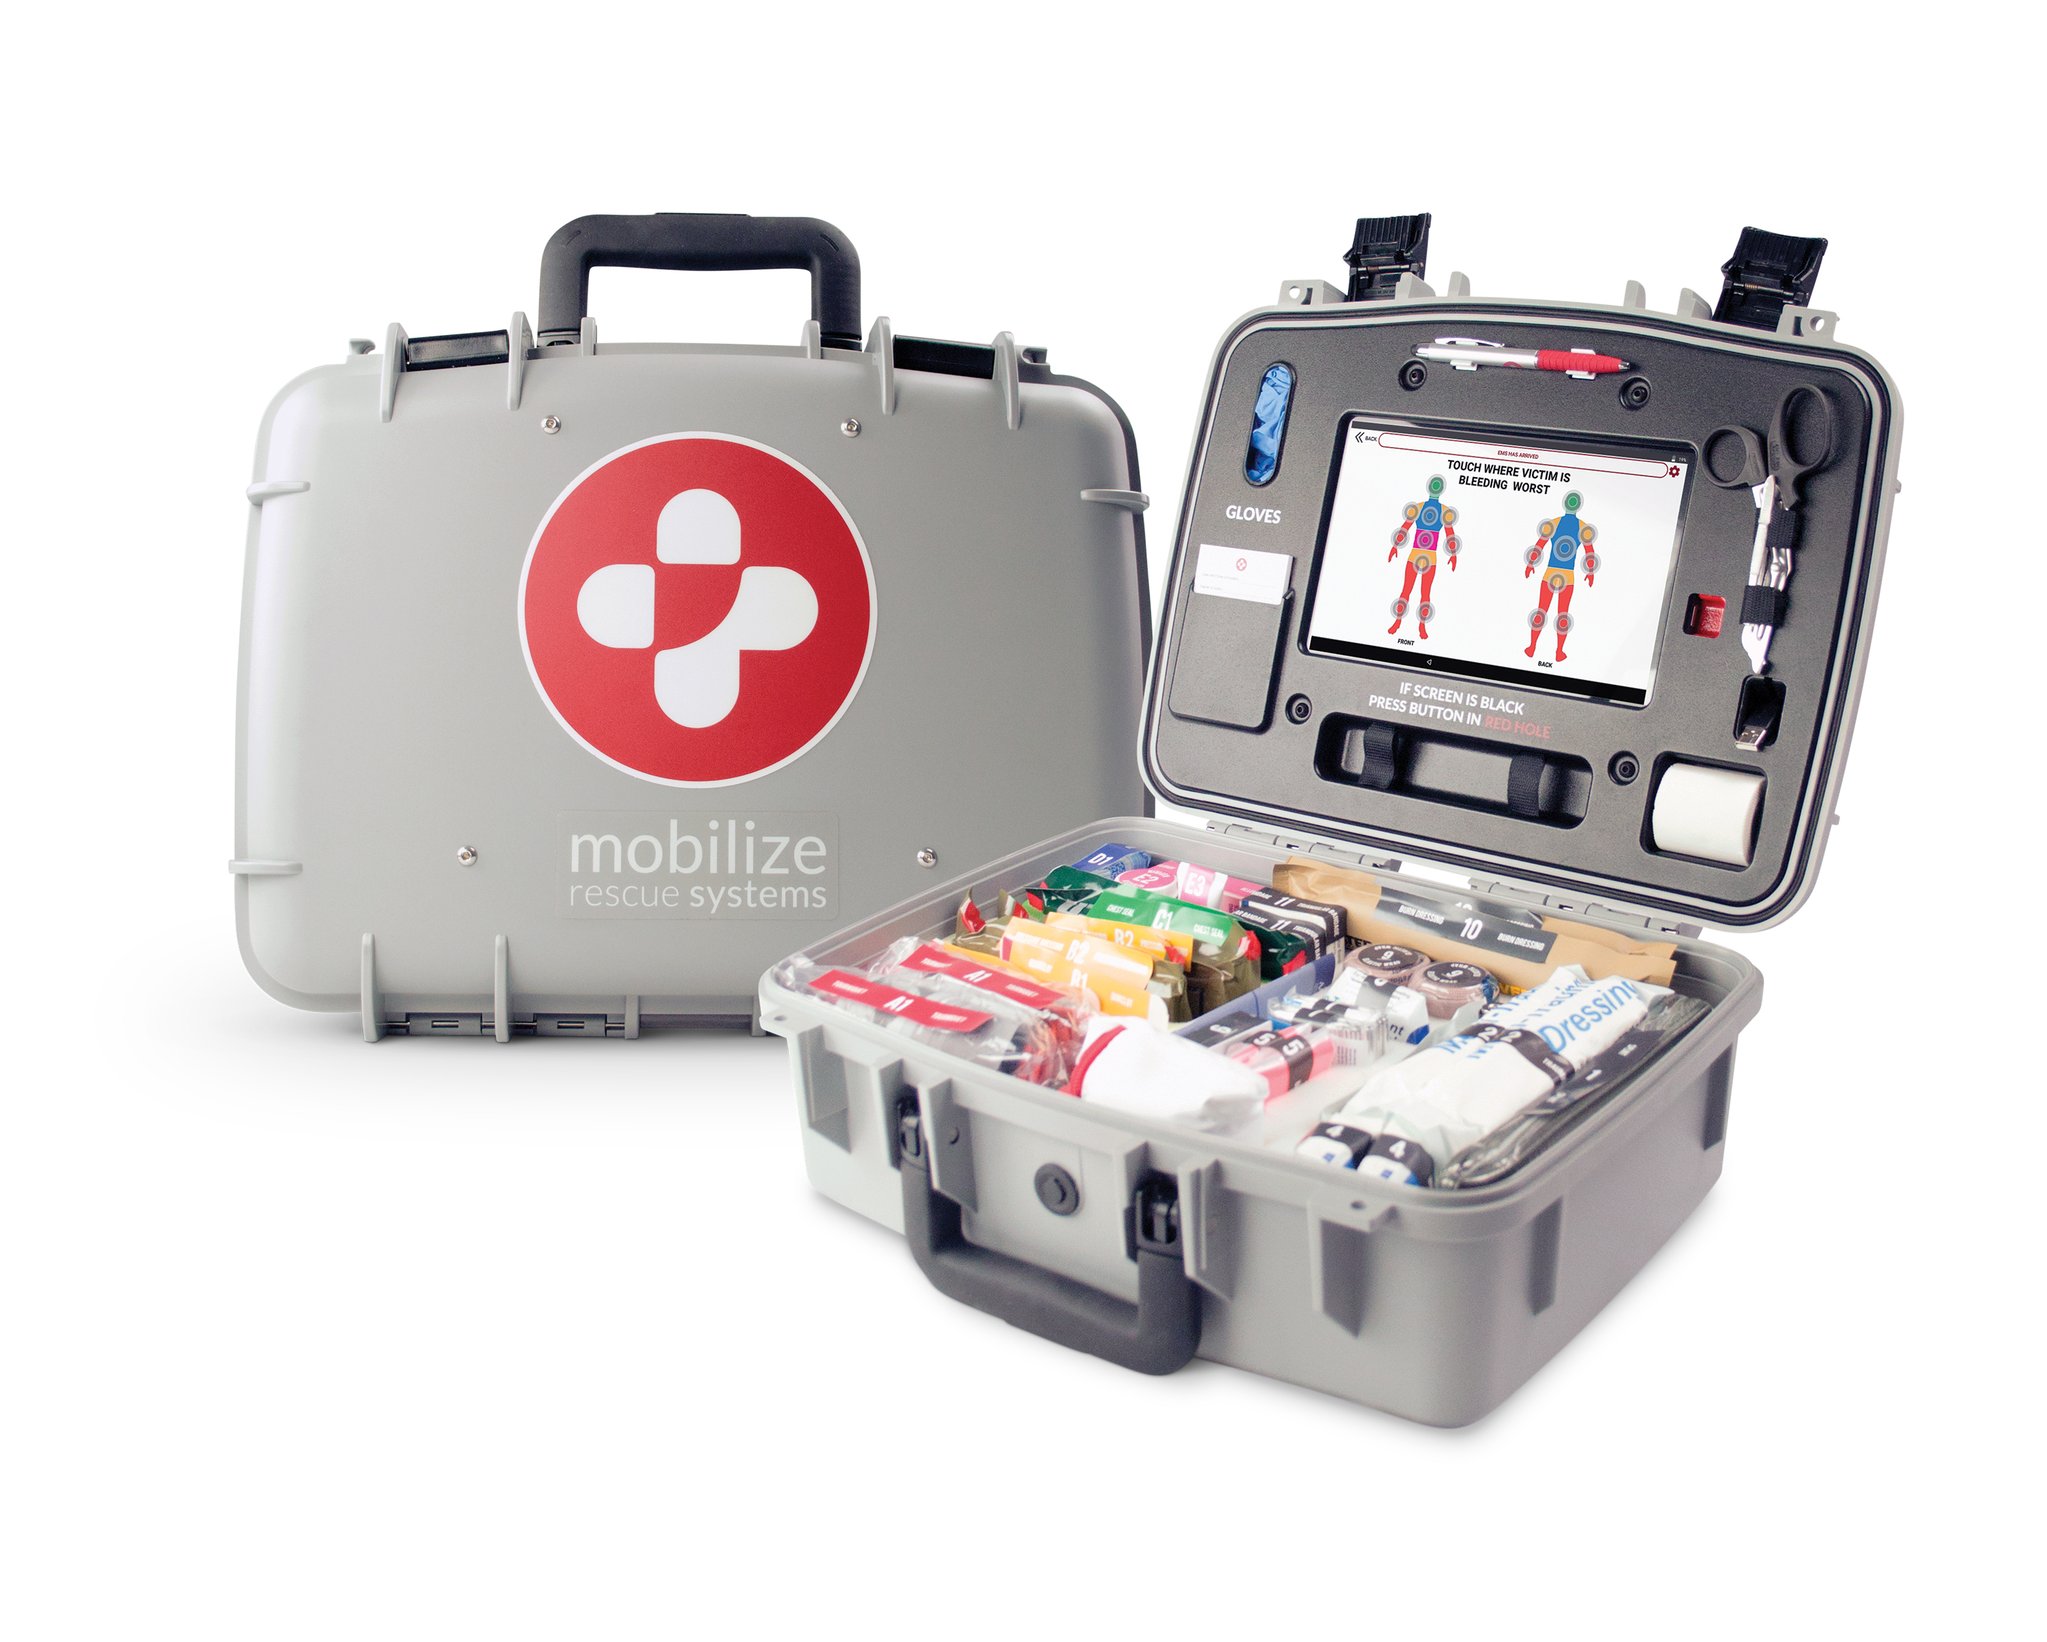 ZOLL Mobilize Comprehensive Trauma Kit - American AED